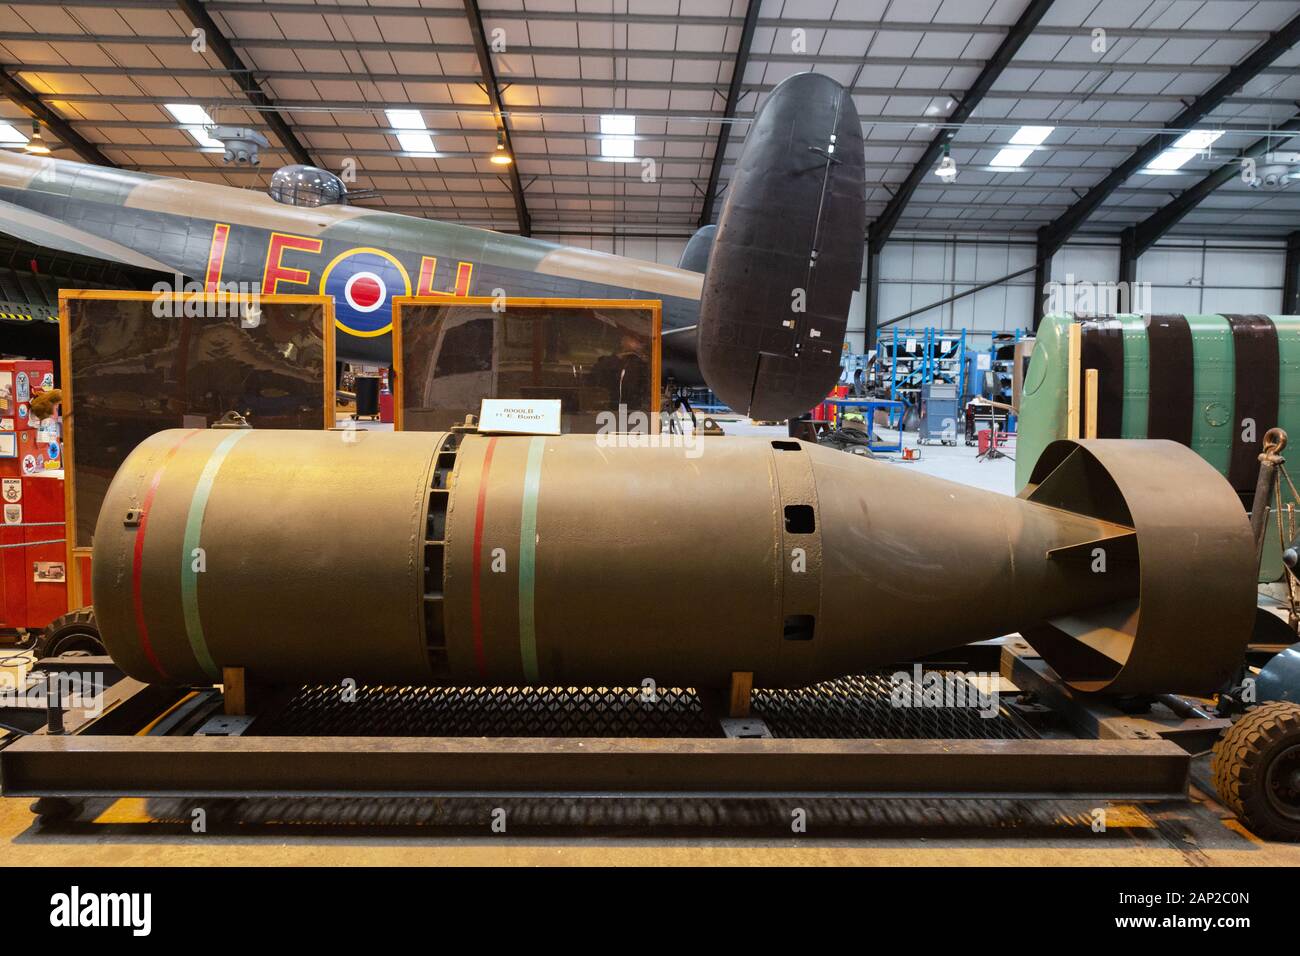 Second world war bomb; An 8000 lb bomb carried by Lancaster bombers, in WW2, in the Lincolnshire Aviation Heritage Centre, East Kirkby Lincolnshire UK Stock Photo